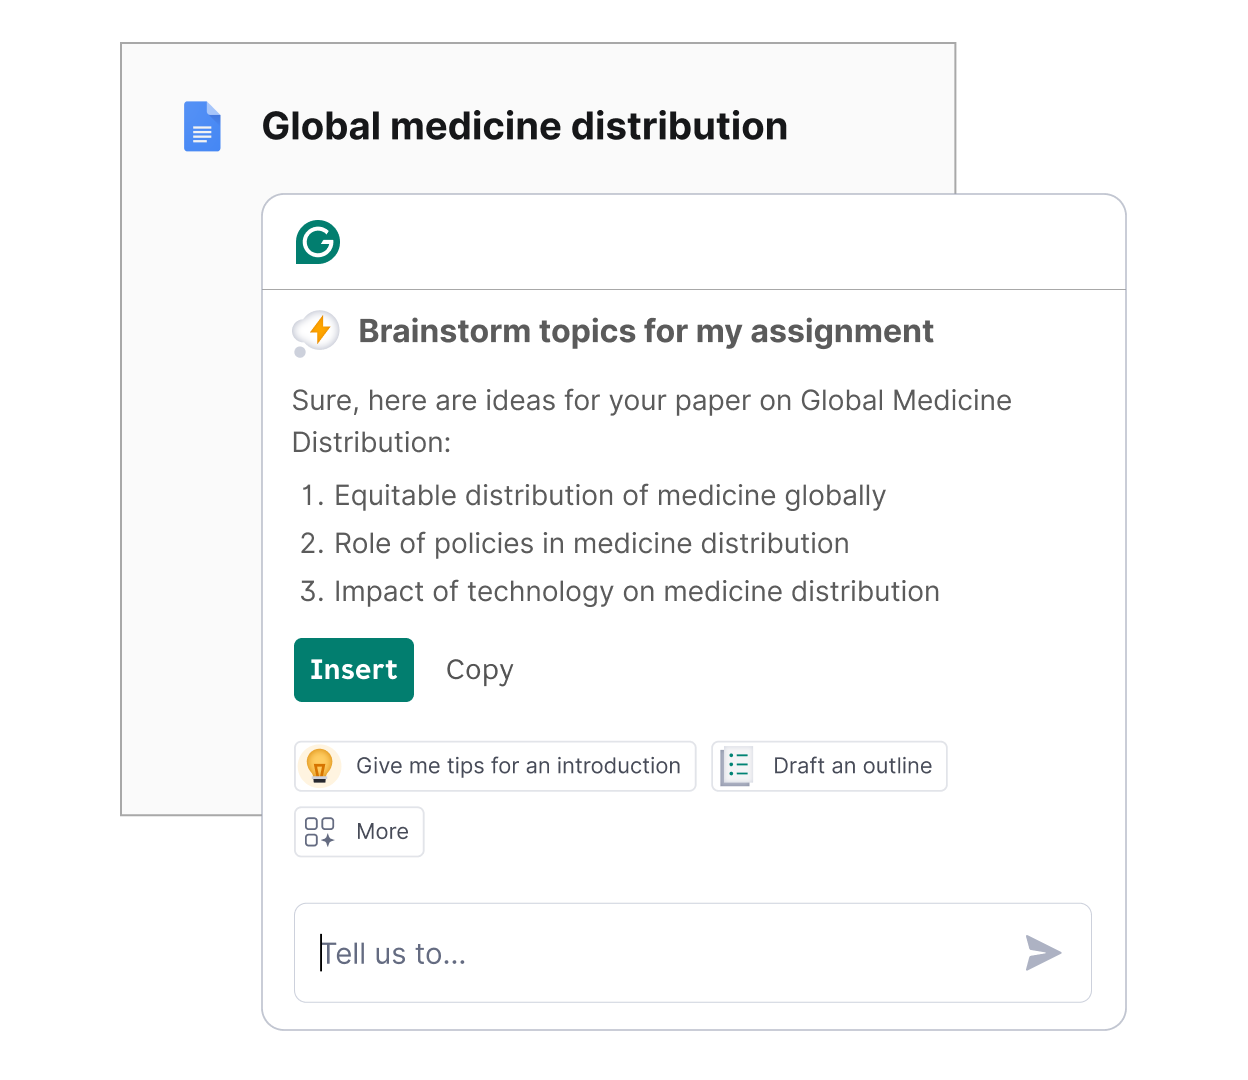 Grammarly helps you brainstorm topics for your assignment